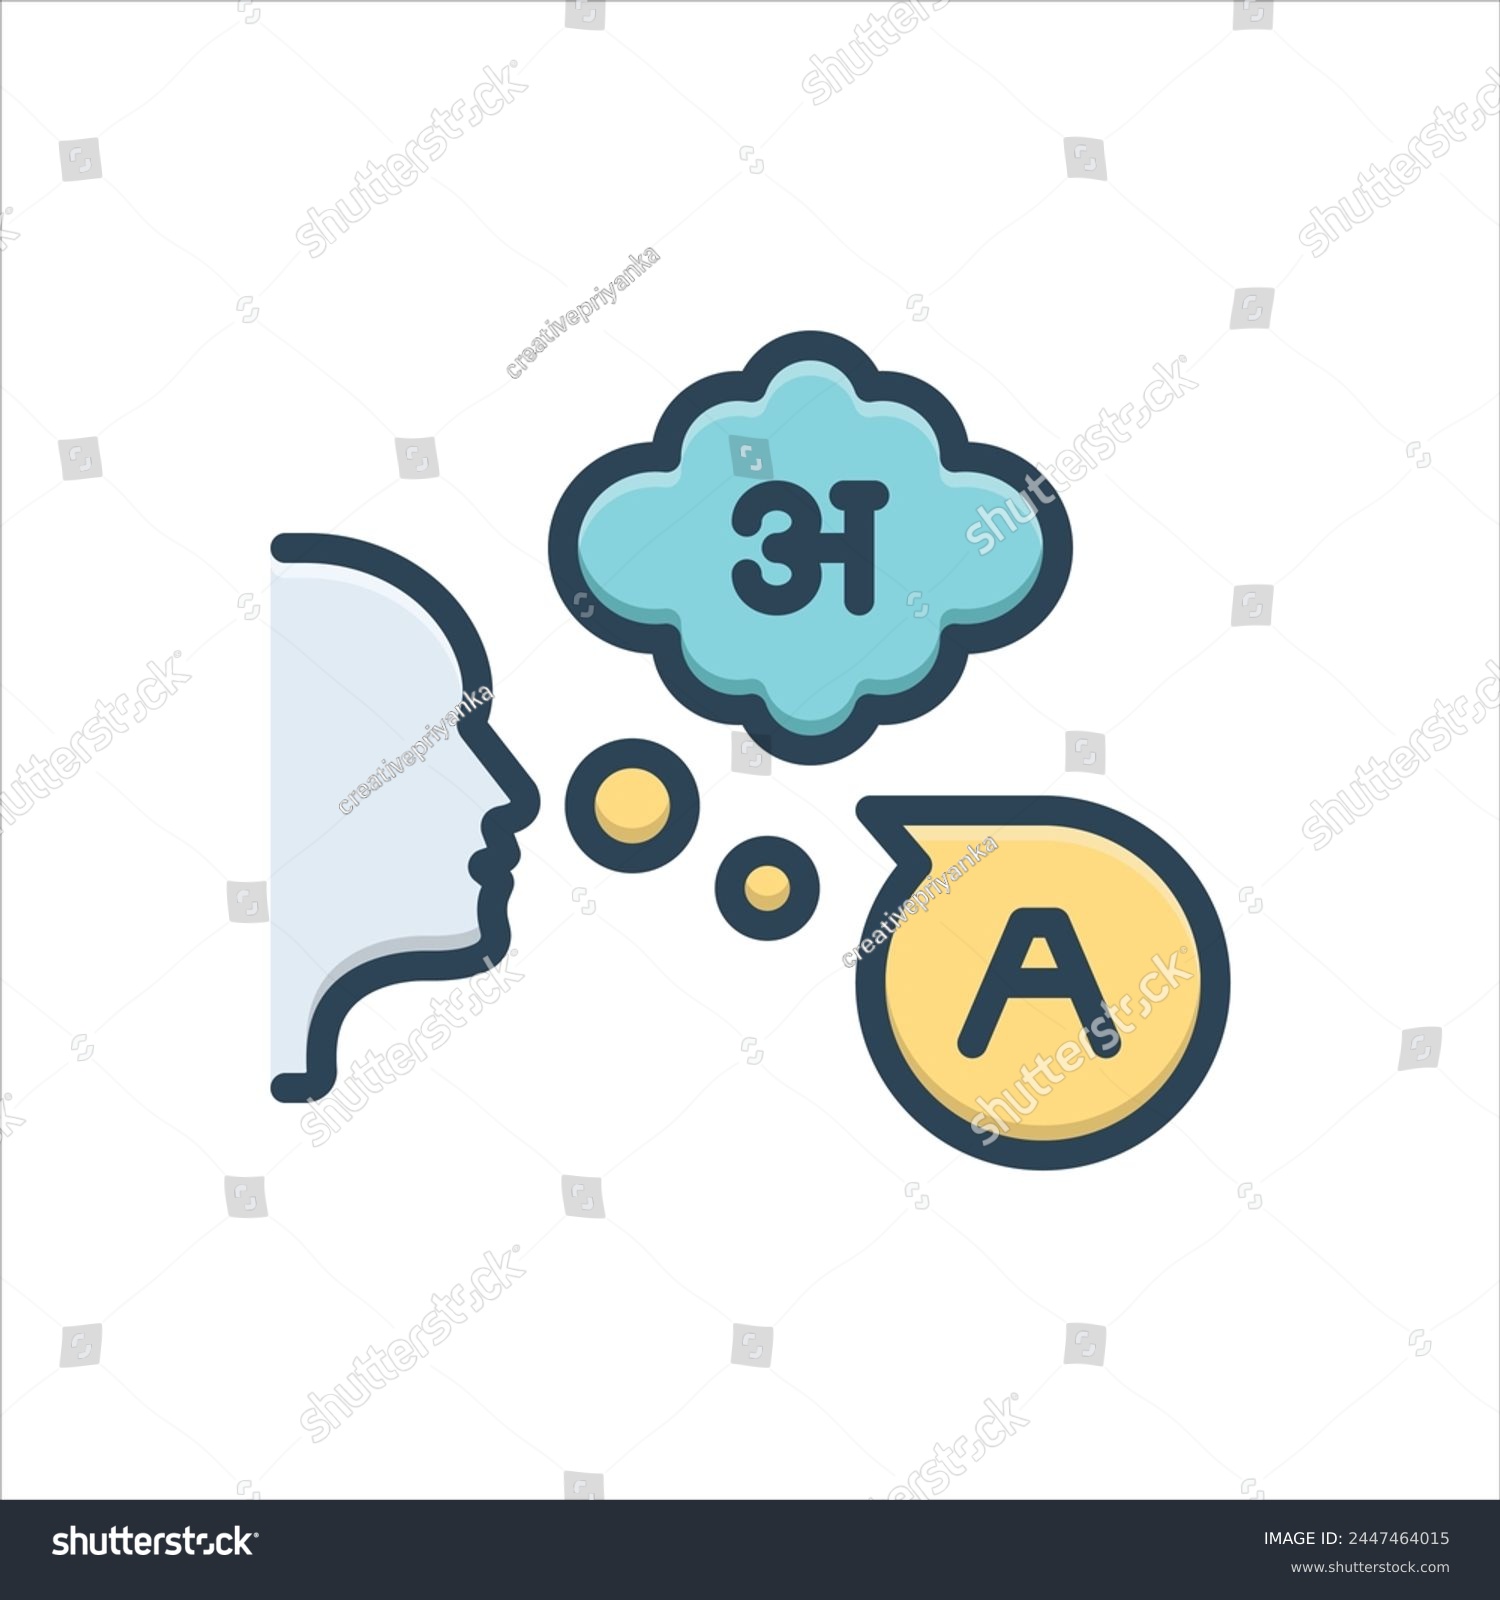 SVG of Vector colorful illustration icon for dialect svg